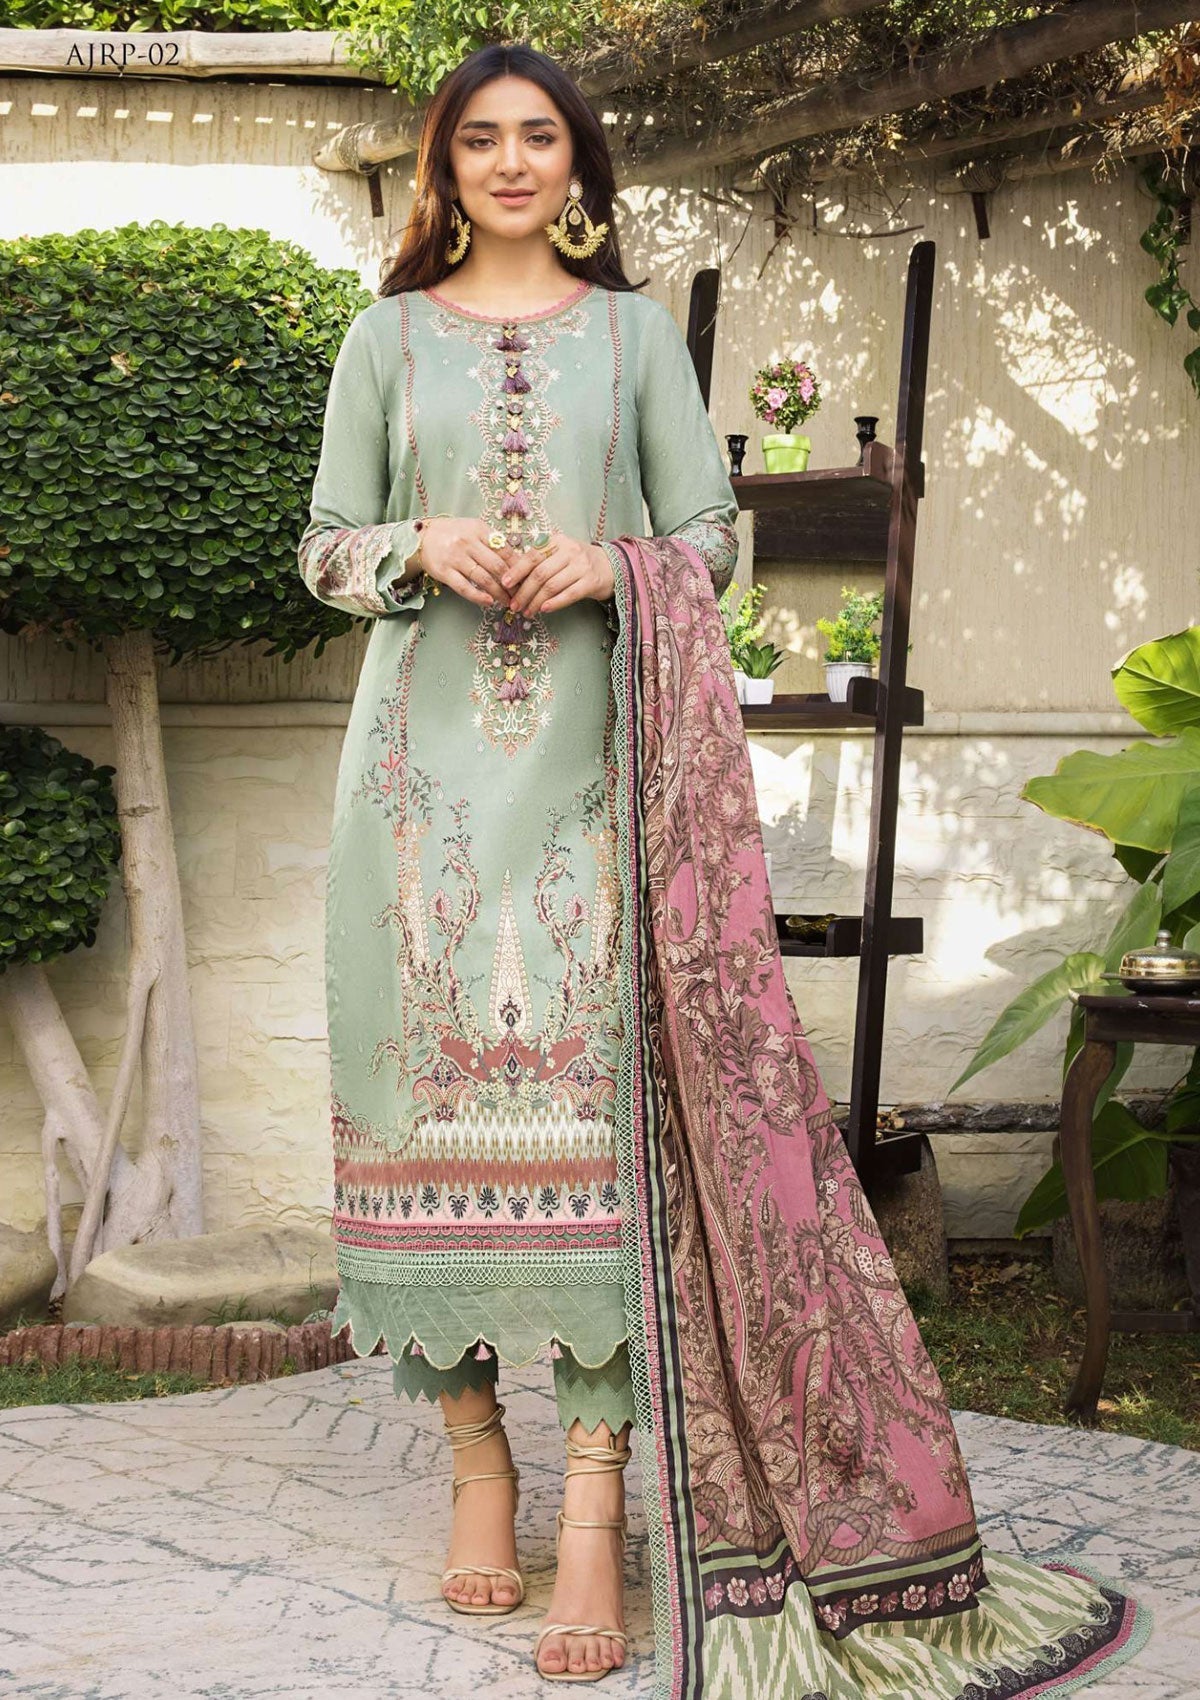 Lawn Collection - Asim Jofa - Rania - AJRP#02 available at Saleem Fabrics Traditions